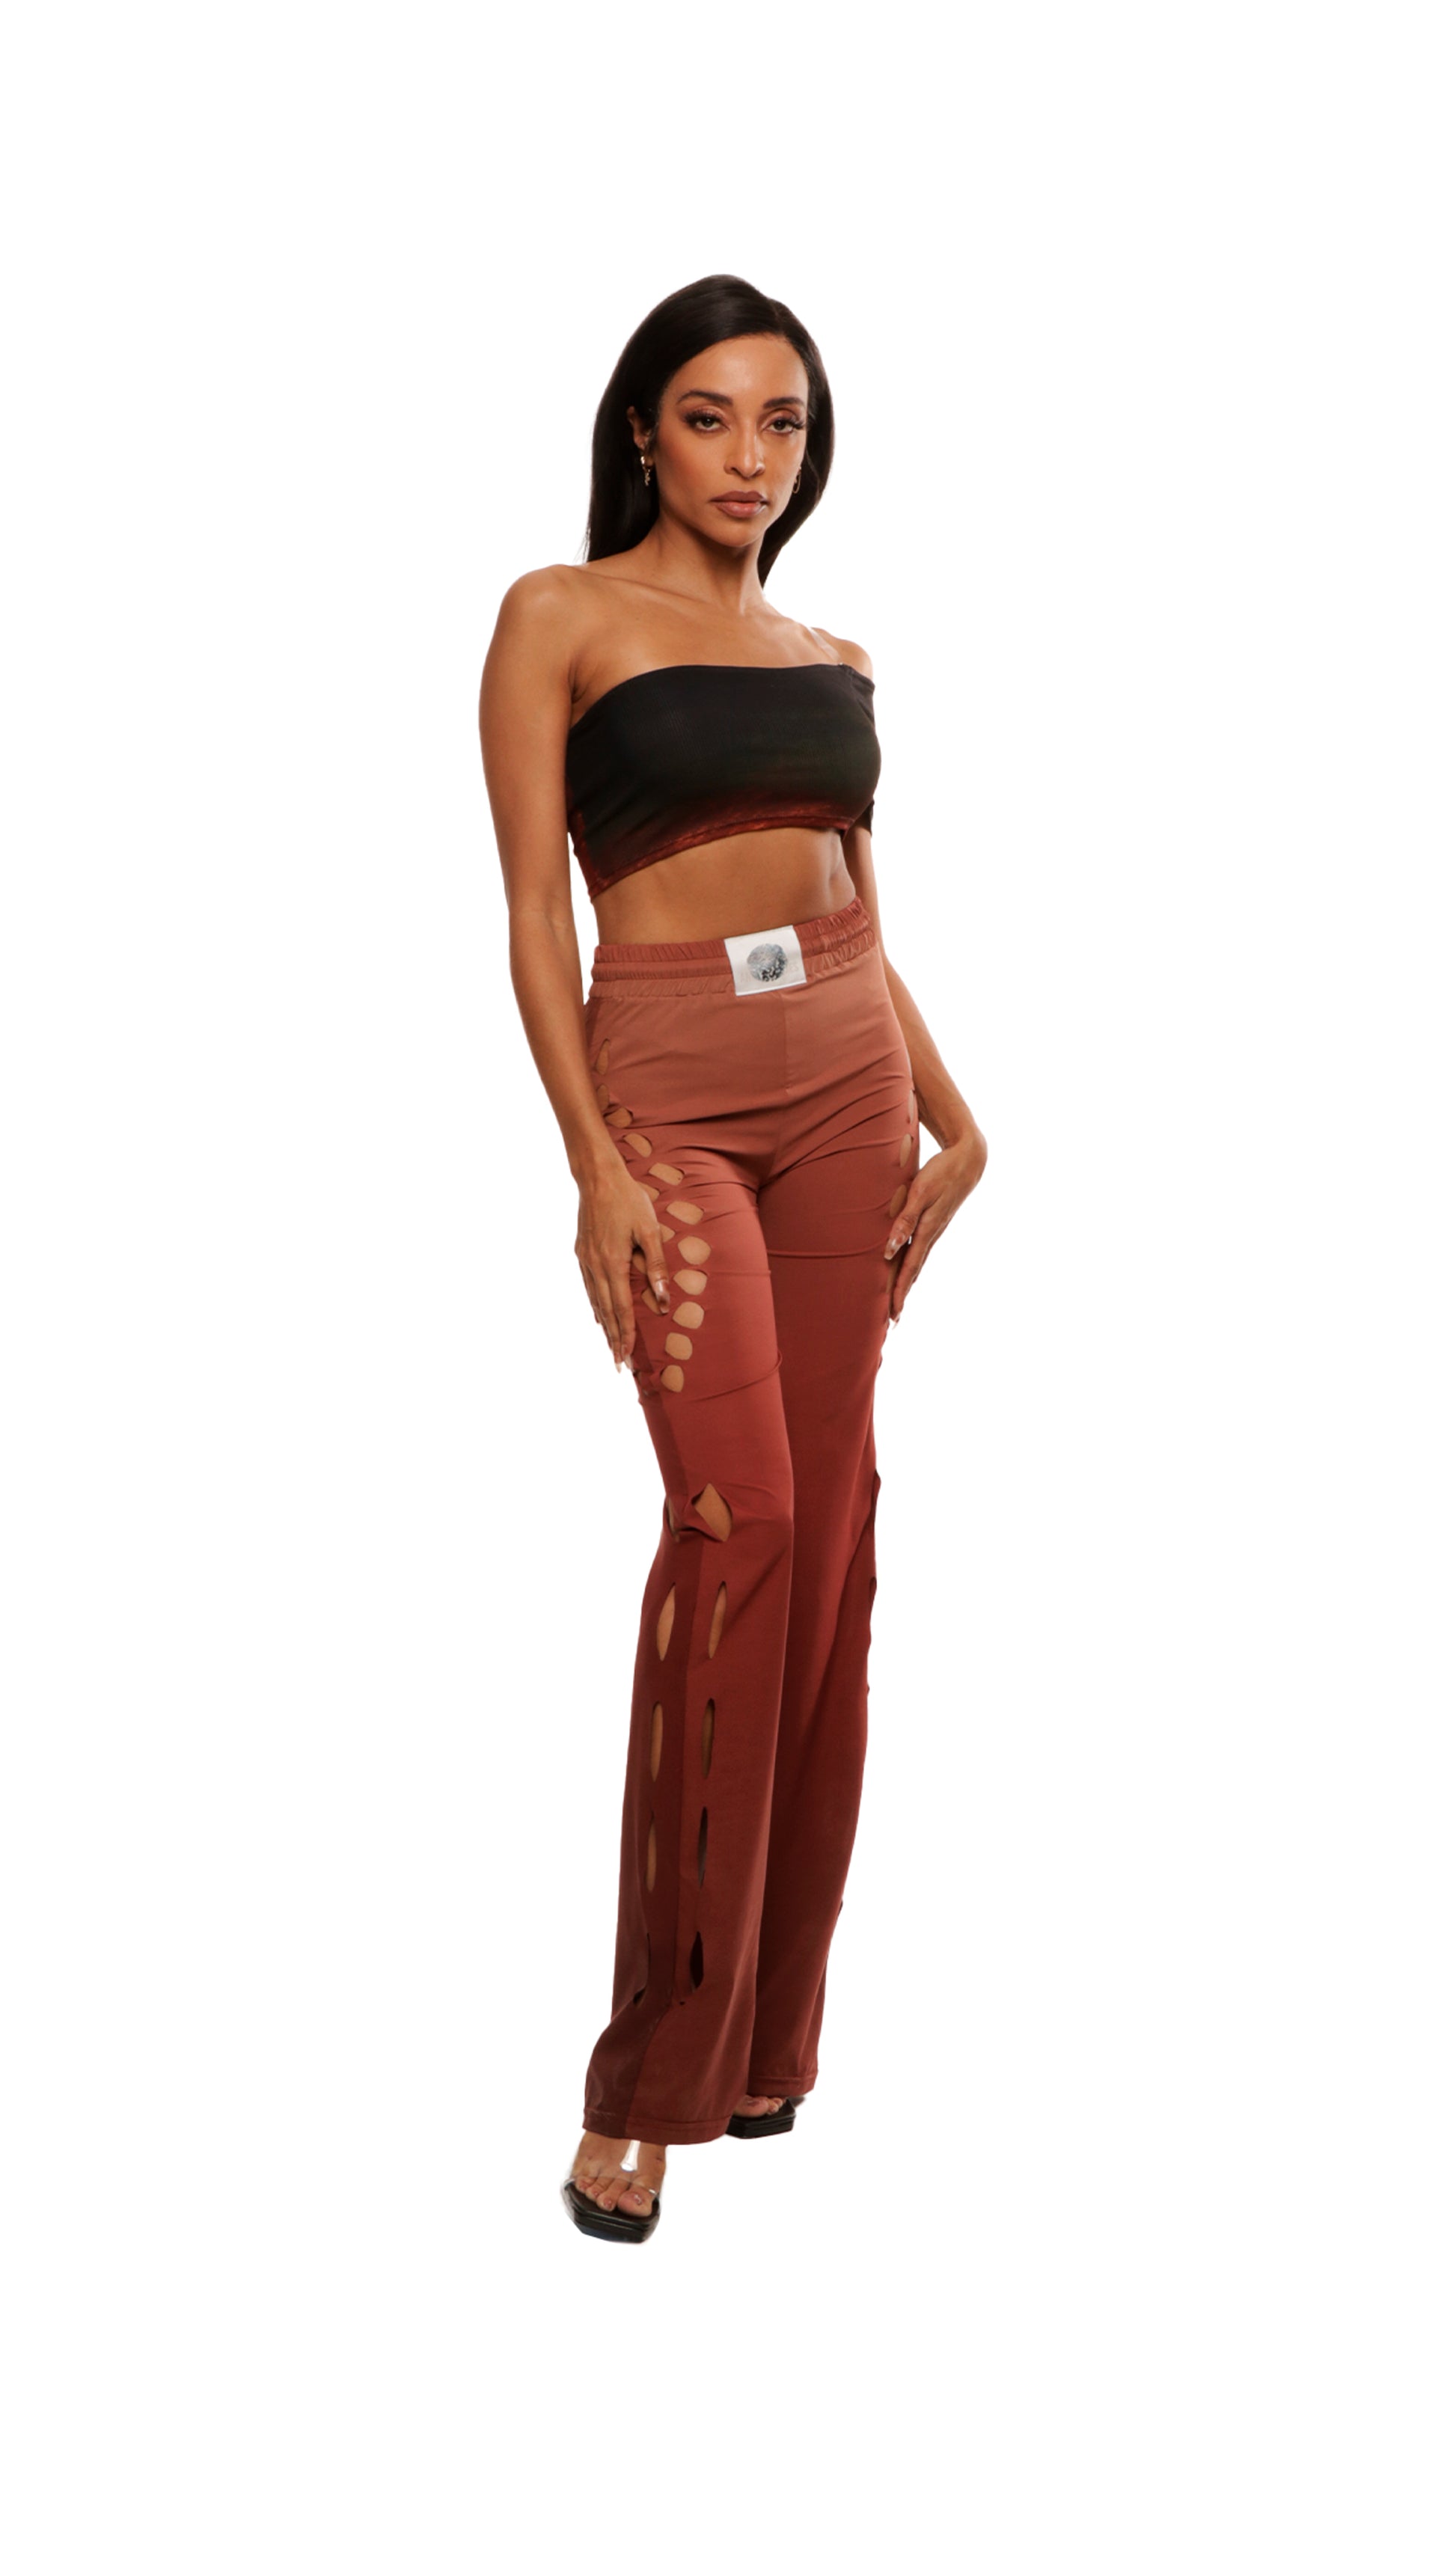 Woman who looks like Beyoncé or Aaliyah wears gradient brown toned asymmetrical top with clear strap, side view